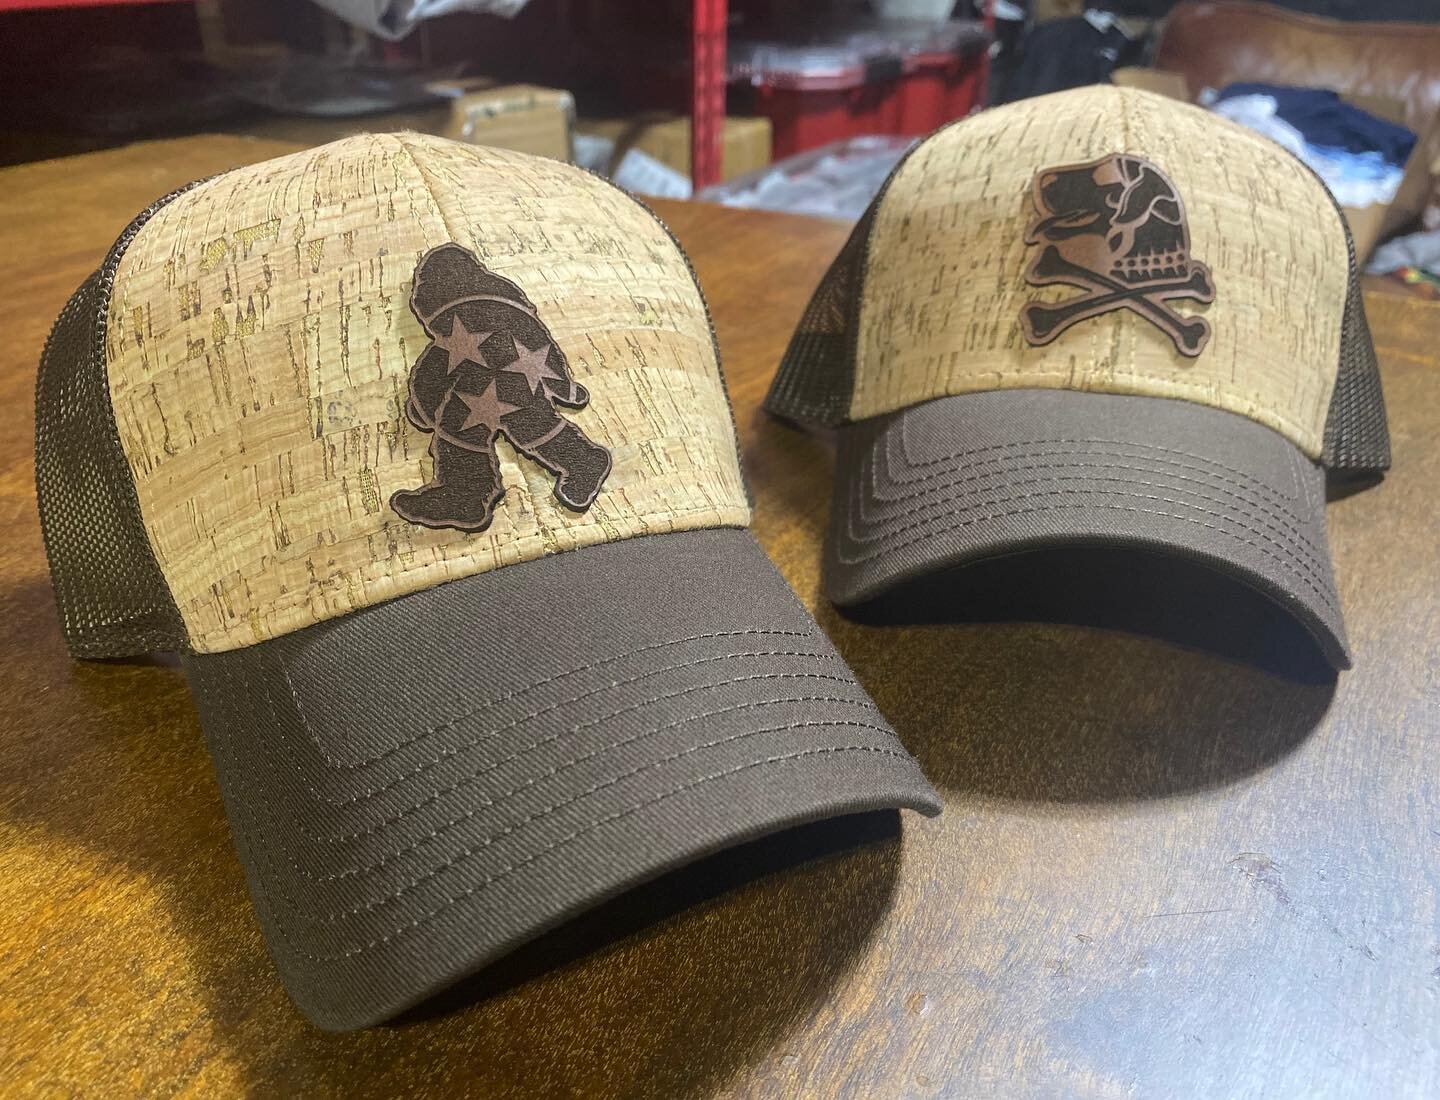 Super excite that our 2023 hat line-up is underway&hellip;stay tuned for so many more designs!  Fine leather and cork&hellip; we say yes!!! You???
#patchhats #bigfoothats #sasquatchapparel #customapparel #corkhats #whatthesas #skunkape #piratedog #th